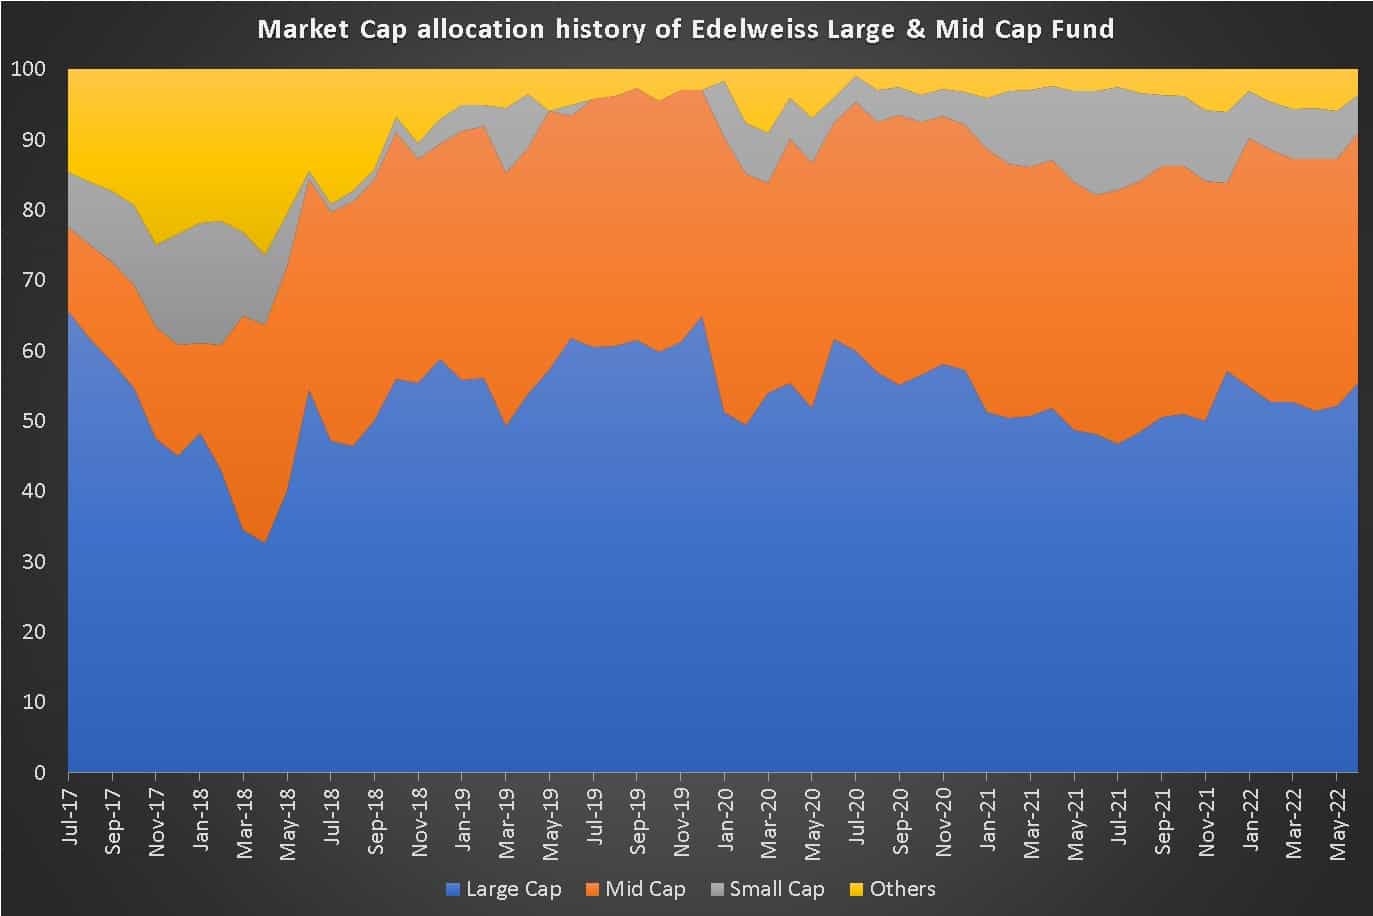 Market Cap allocation history of Edelweiss Large & Mid Cap Fund